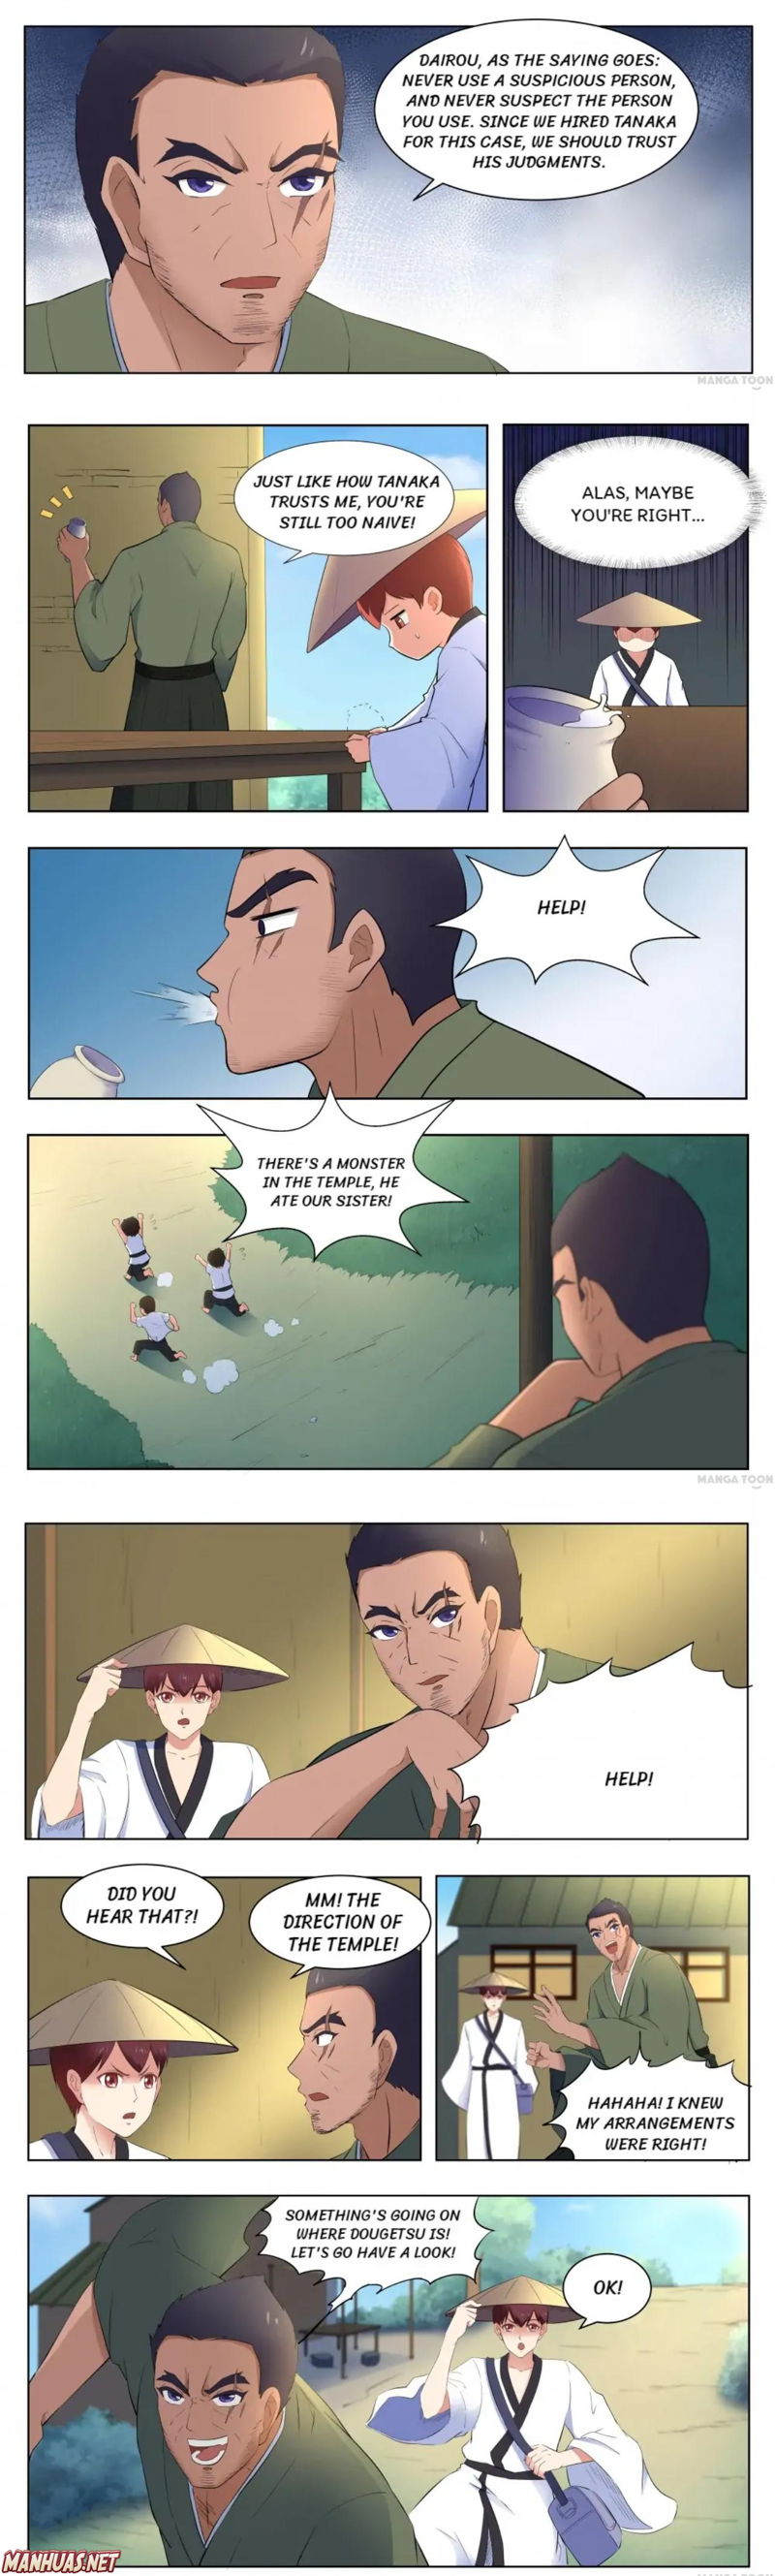 High School Taoist Chapter 118 page 3